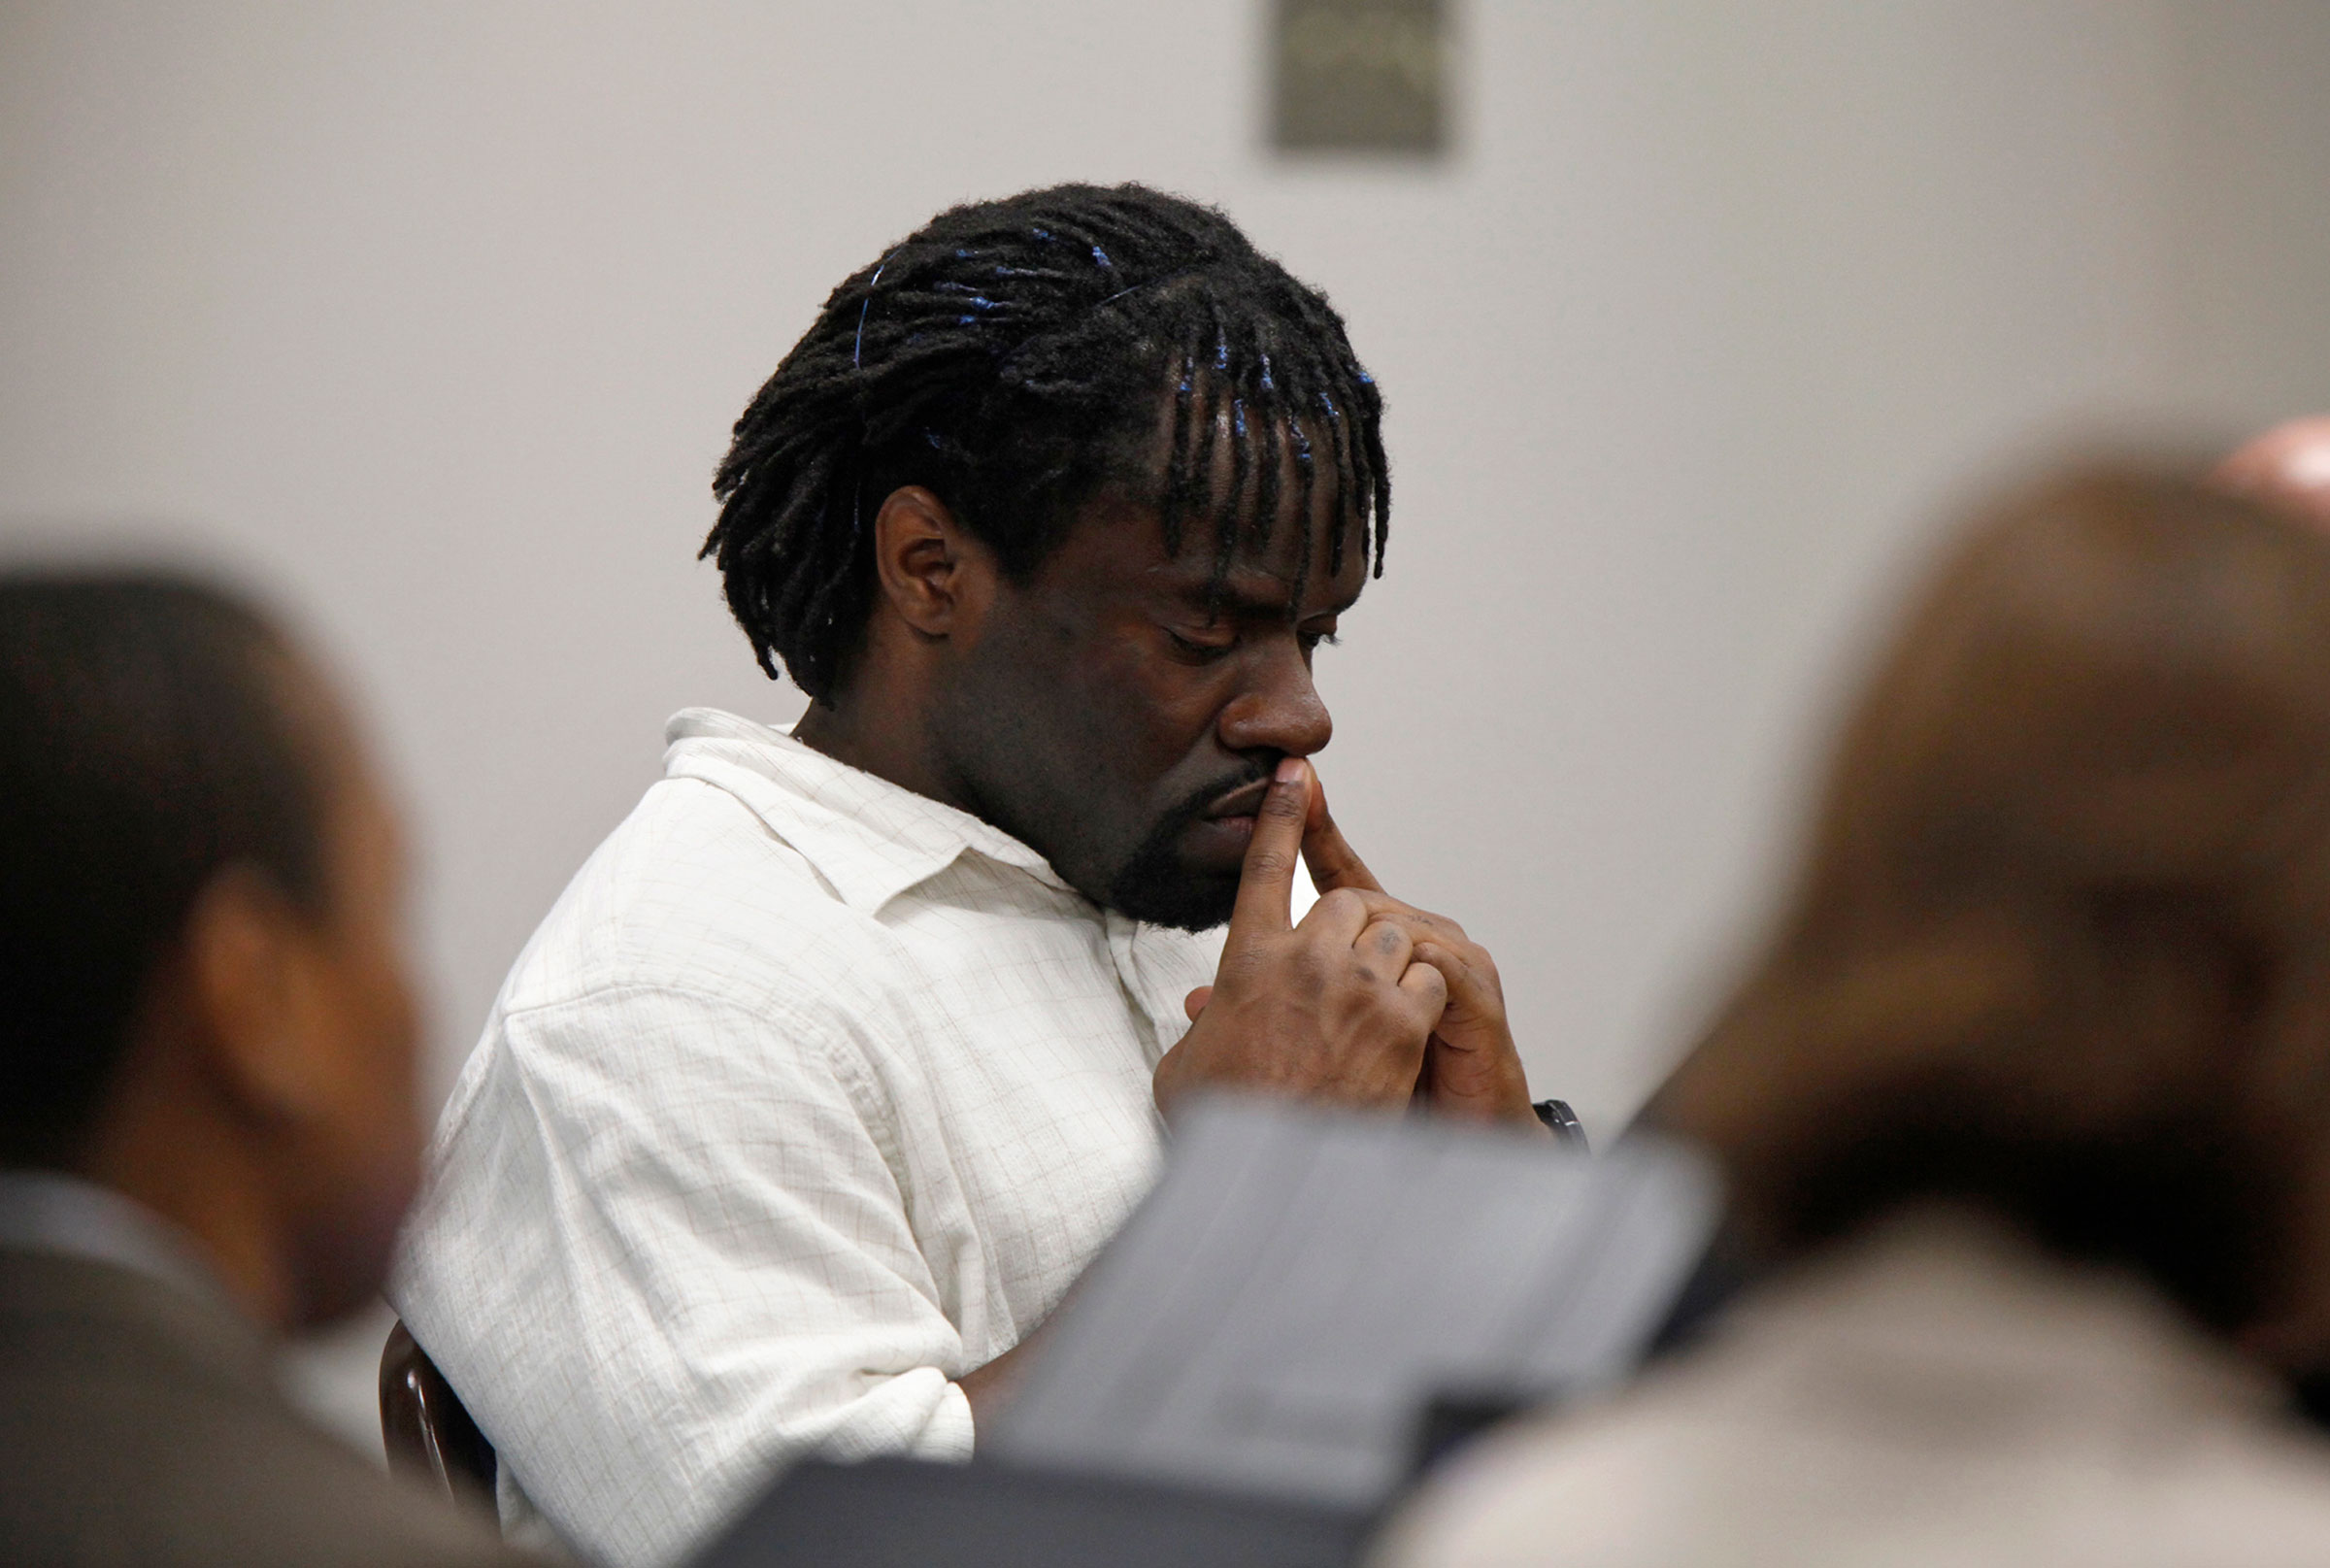 Racial bias law is used to set aside death penalty